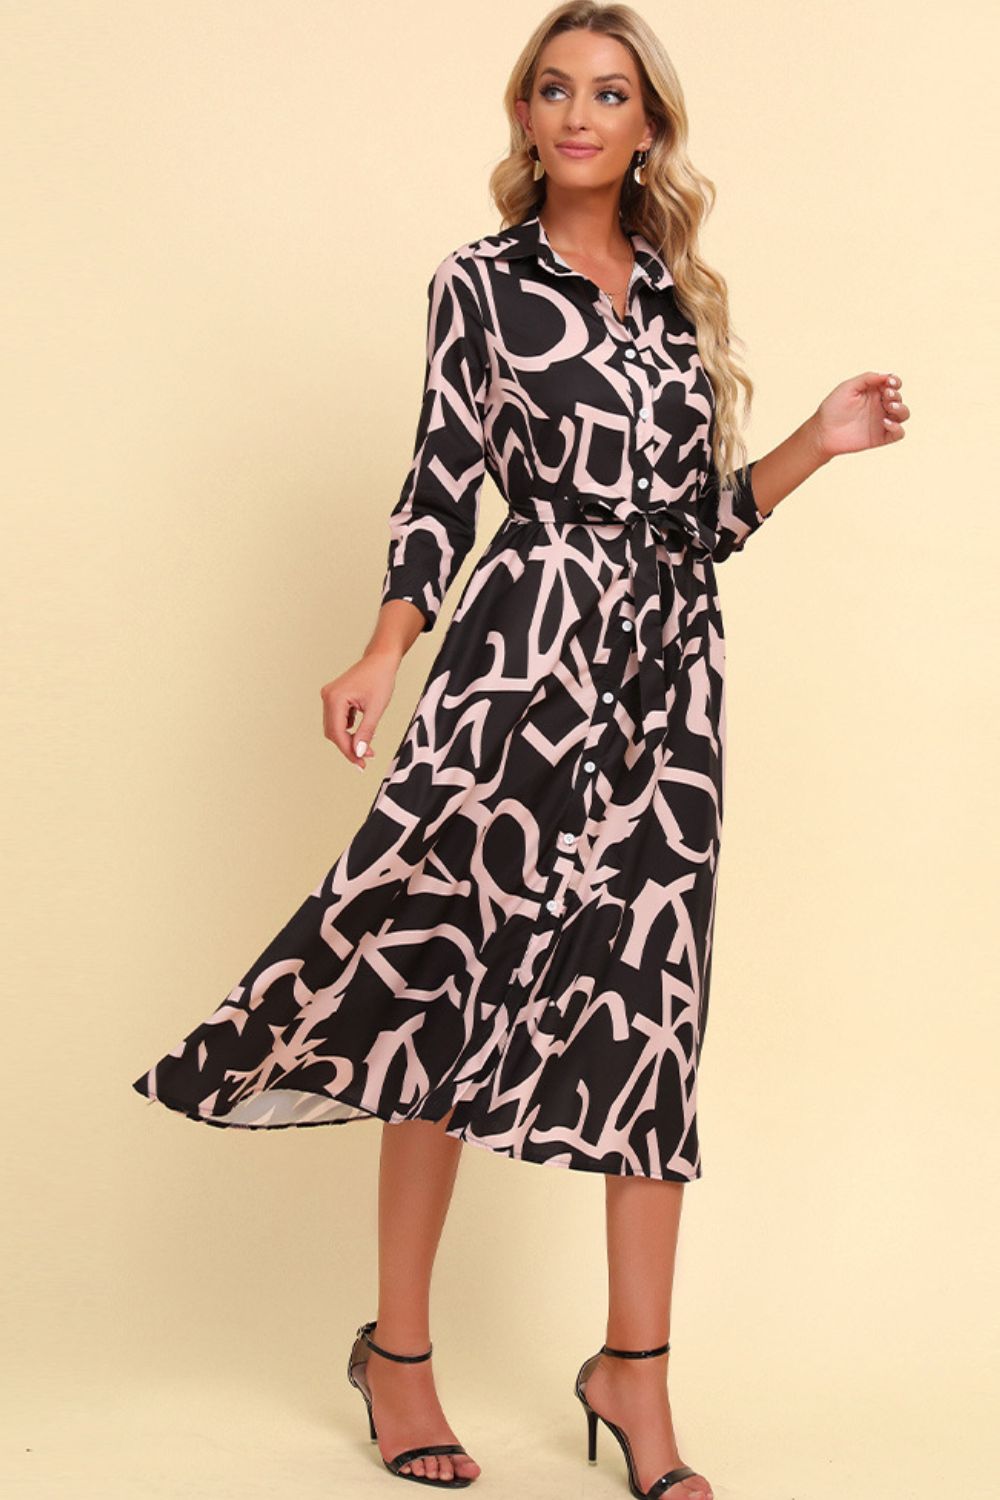 Printed Button Front Belted Midi Dress - Online Only